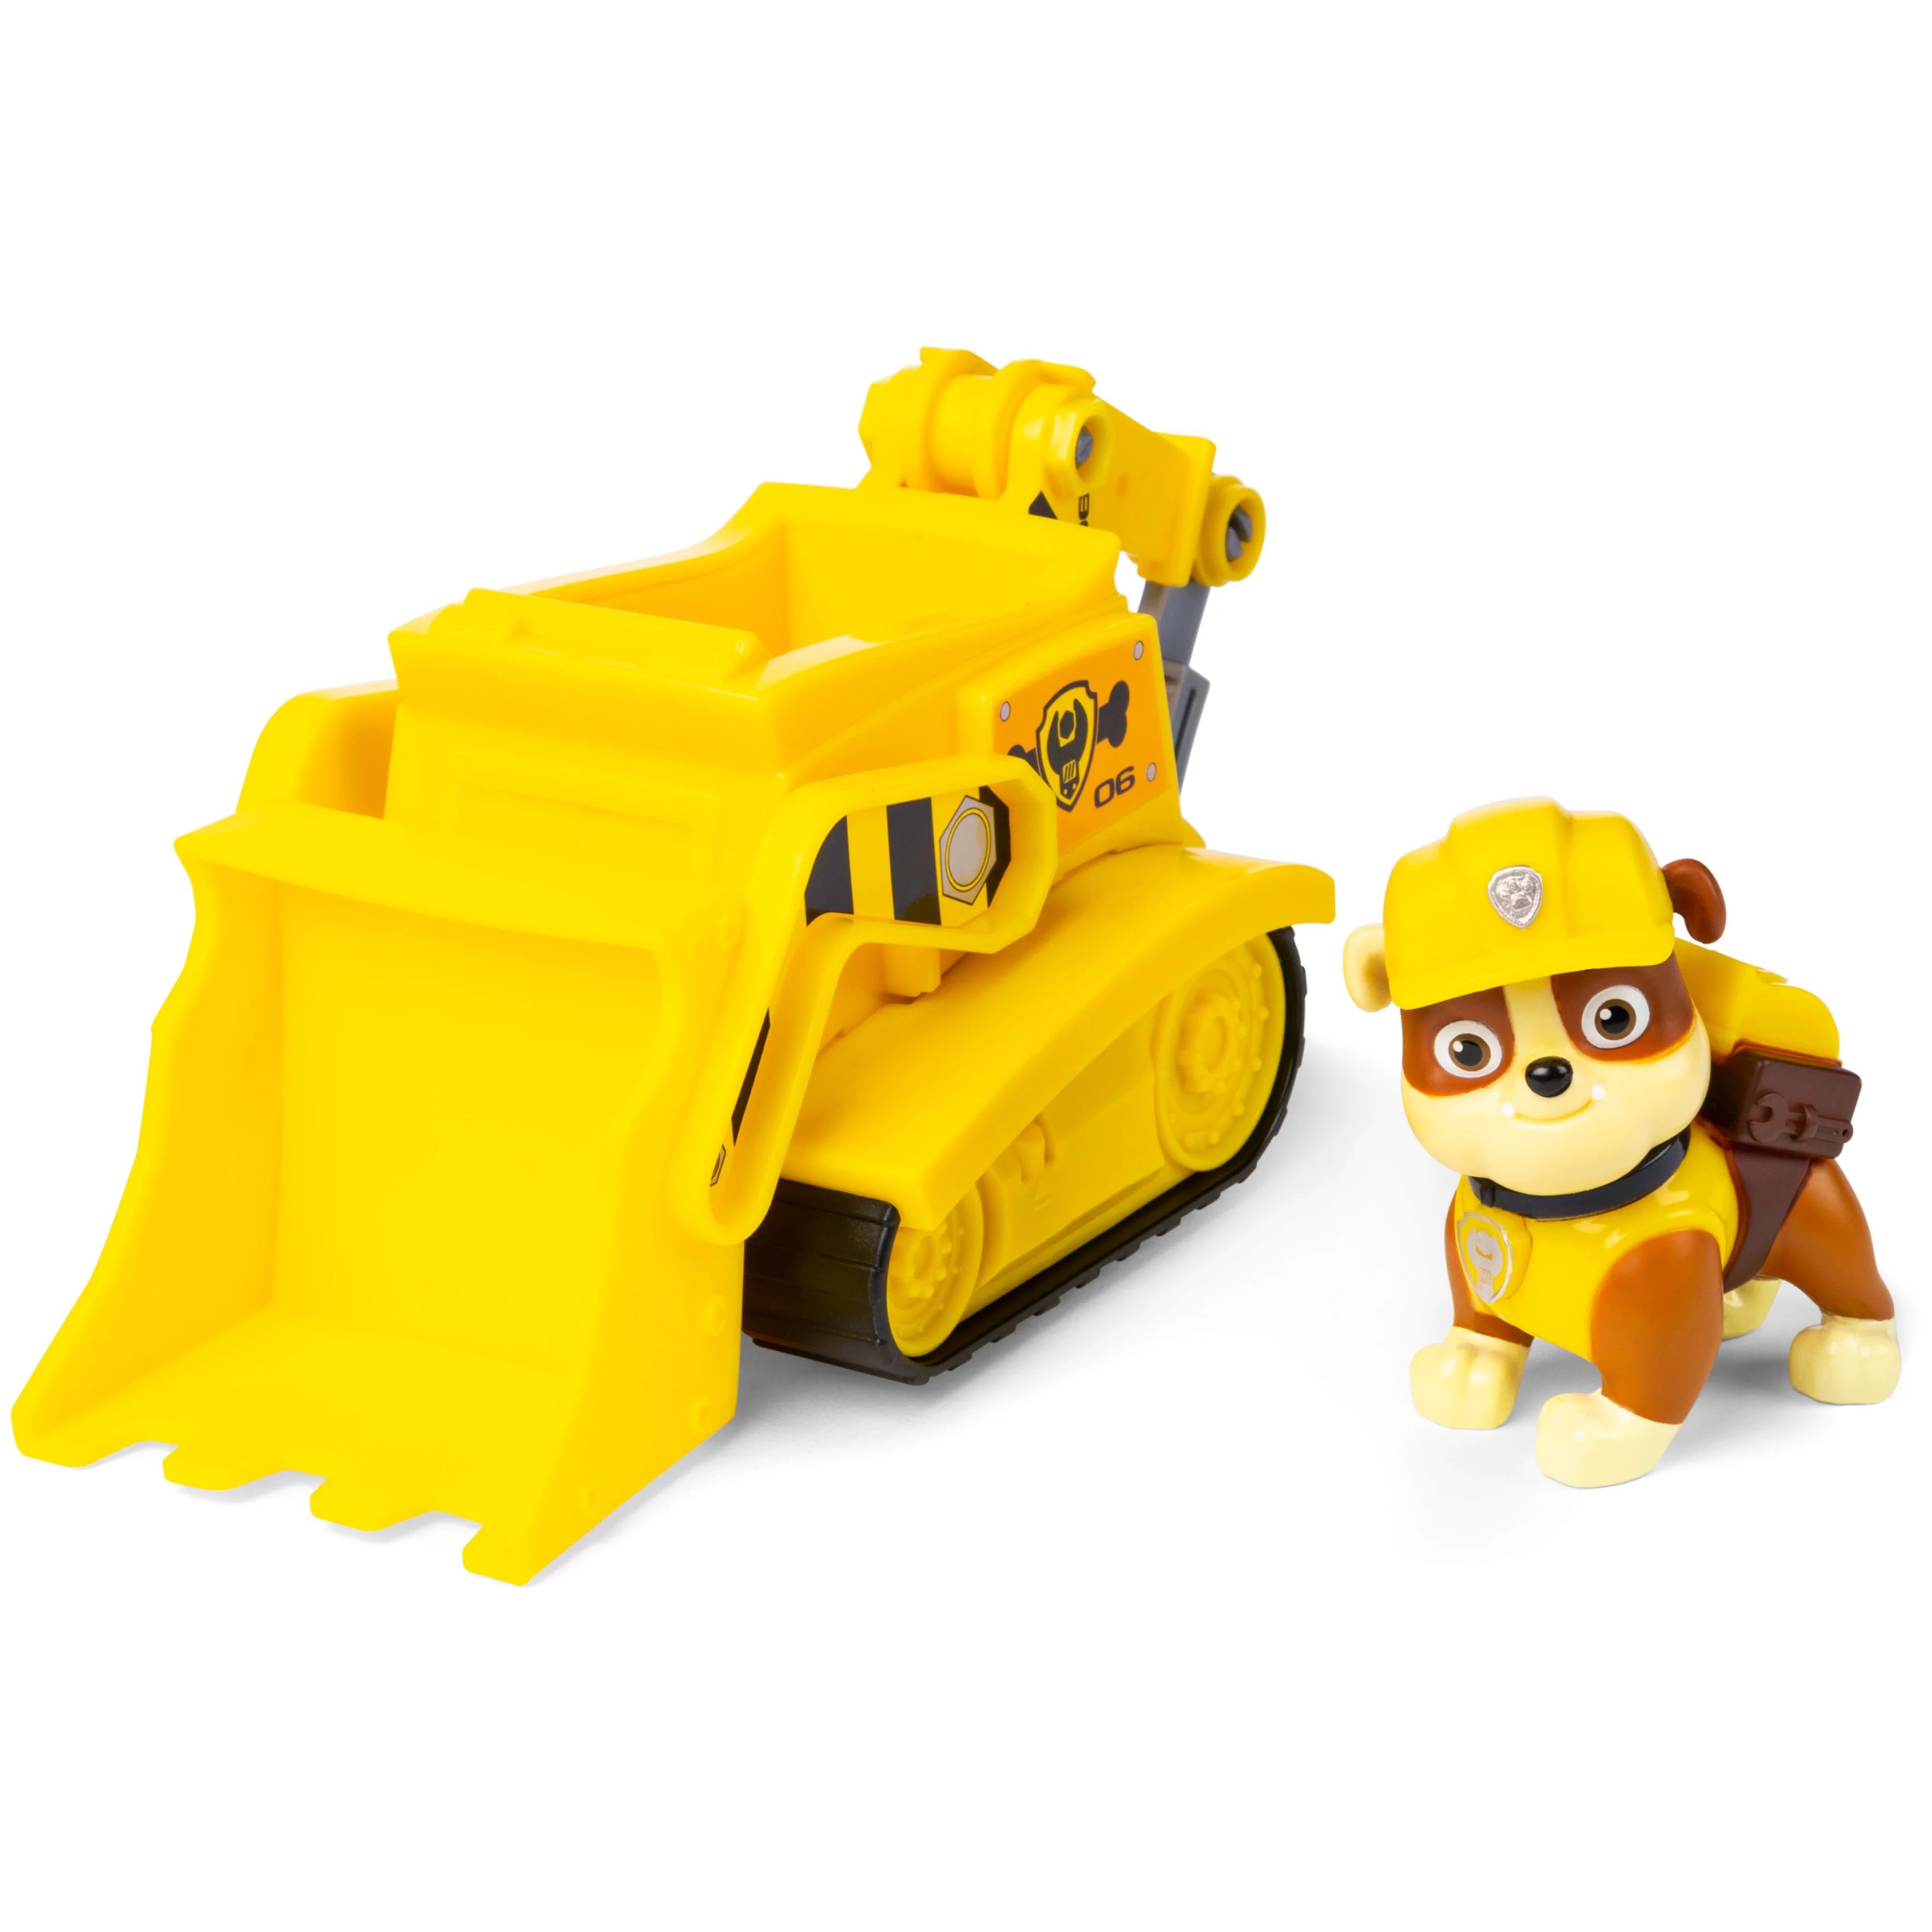 PAW Patrol, Rubble’s Bulldozer Vehicle with Collectible Figure, for Kids Aged 3 and Up | Walmart (US)